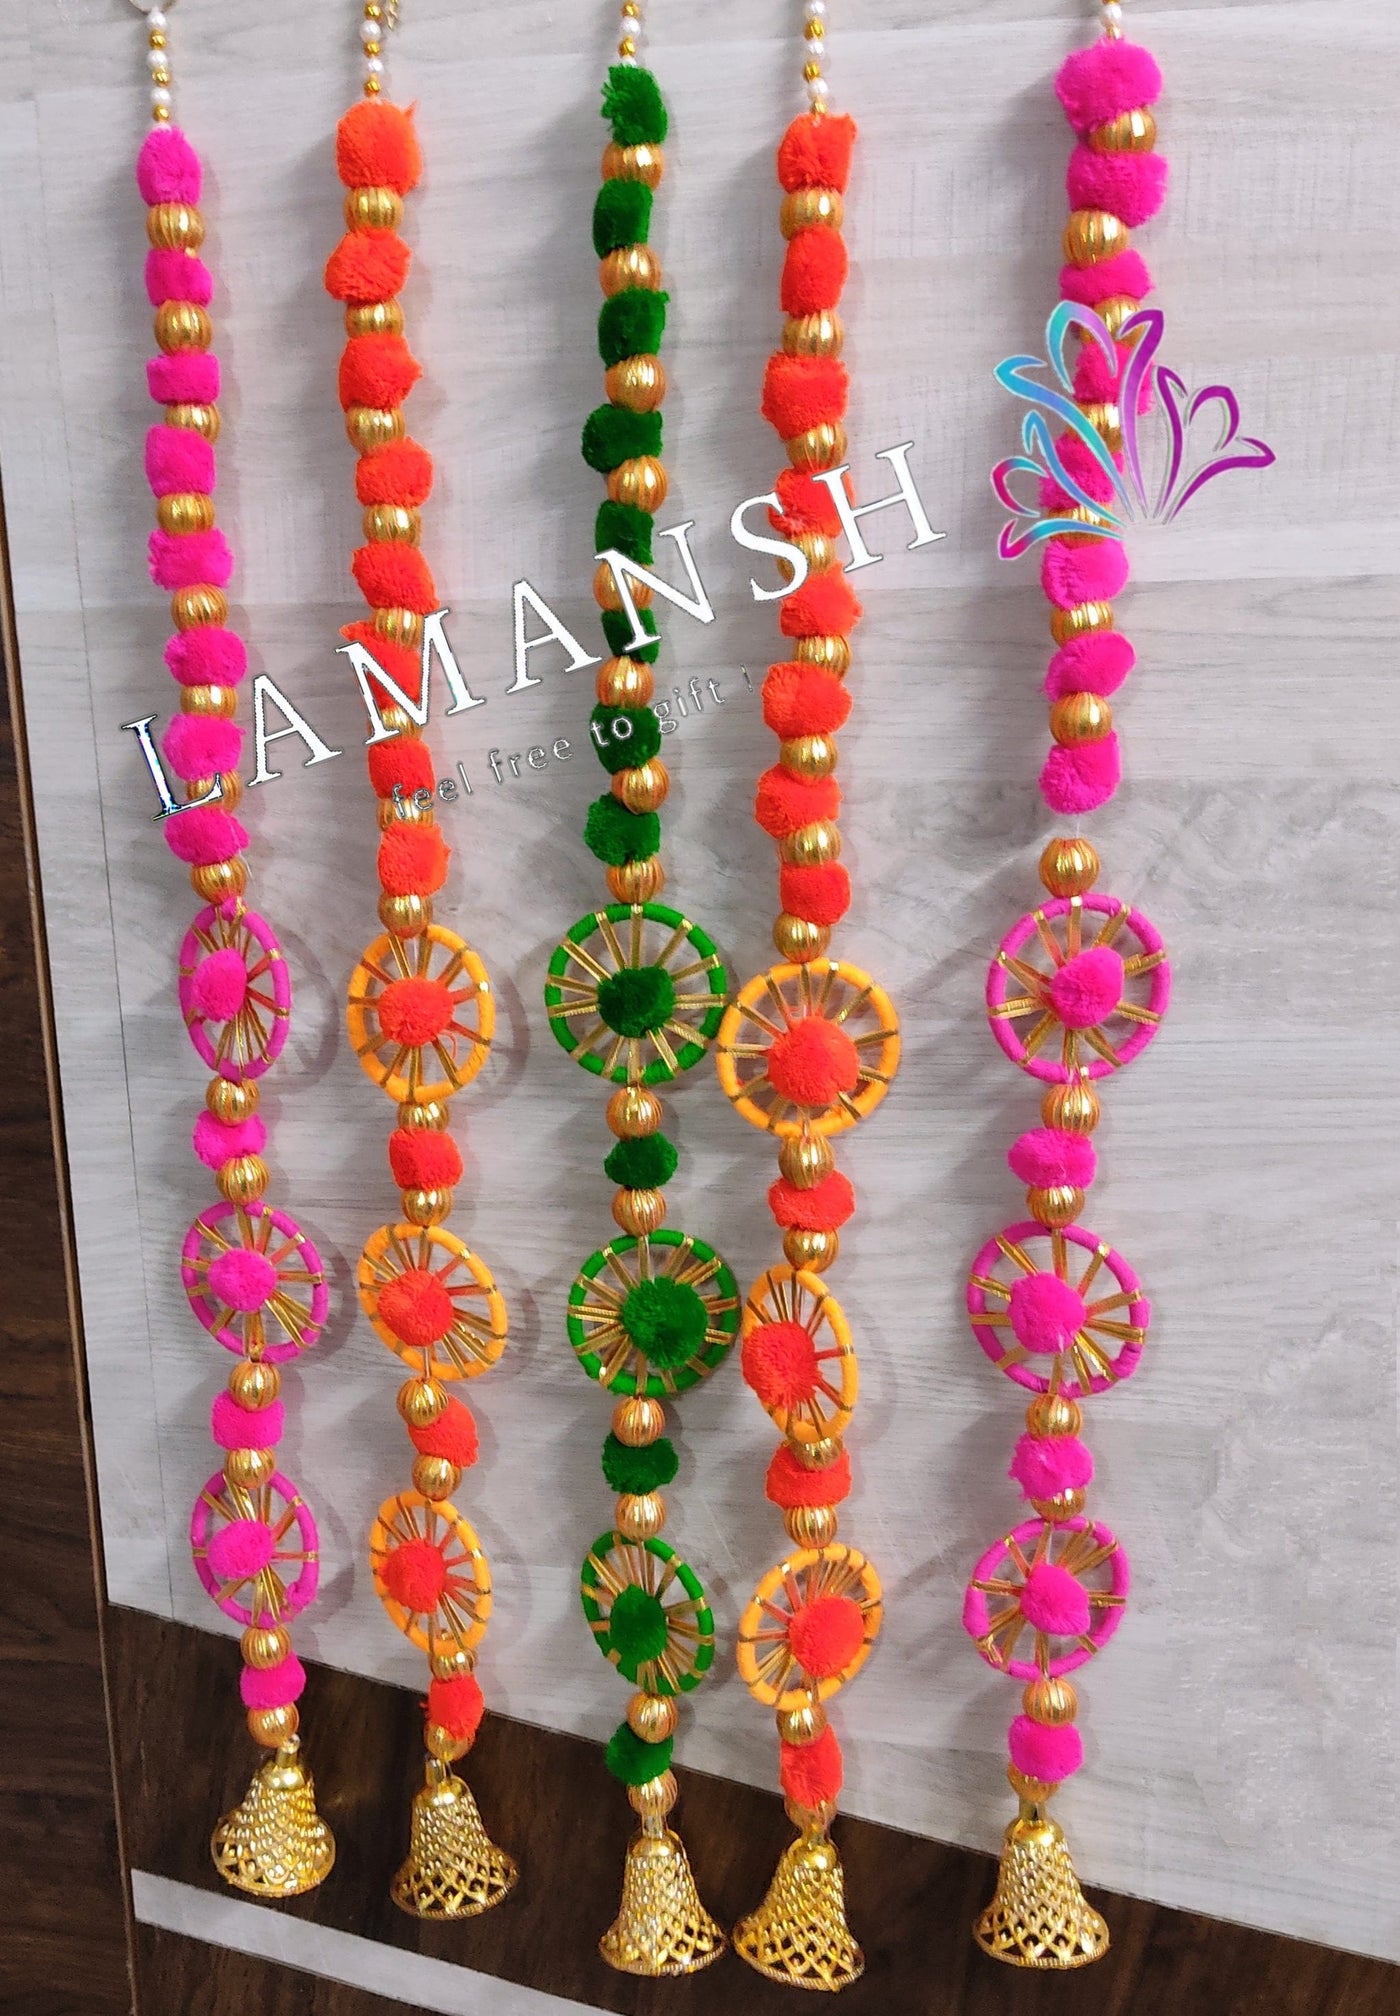 Lamansh gotta hangings Assorted colors / Gota , Woolen Tassels & other craft materials / 10 LAMANSH® 3 ft each Pack of 10 Decorative Round Gota Ring Chakri hangings with Bells & Pom Poms for indian wedding decoration & backdrops / ethnic event decoration products for Diwali